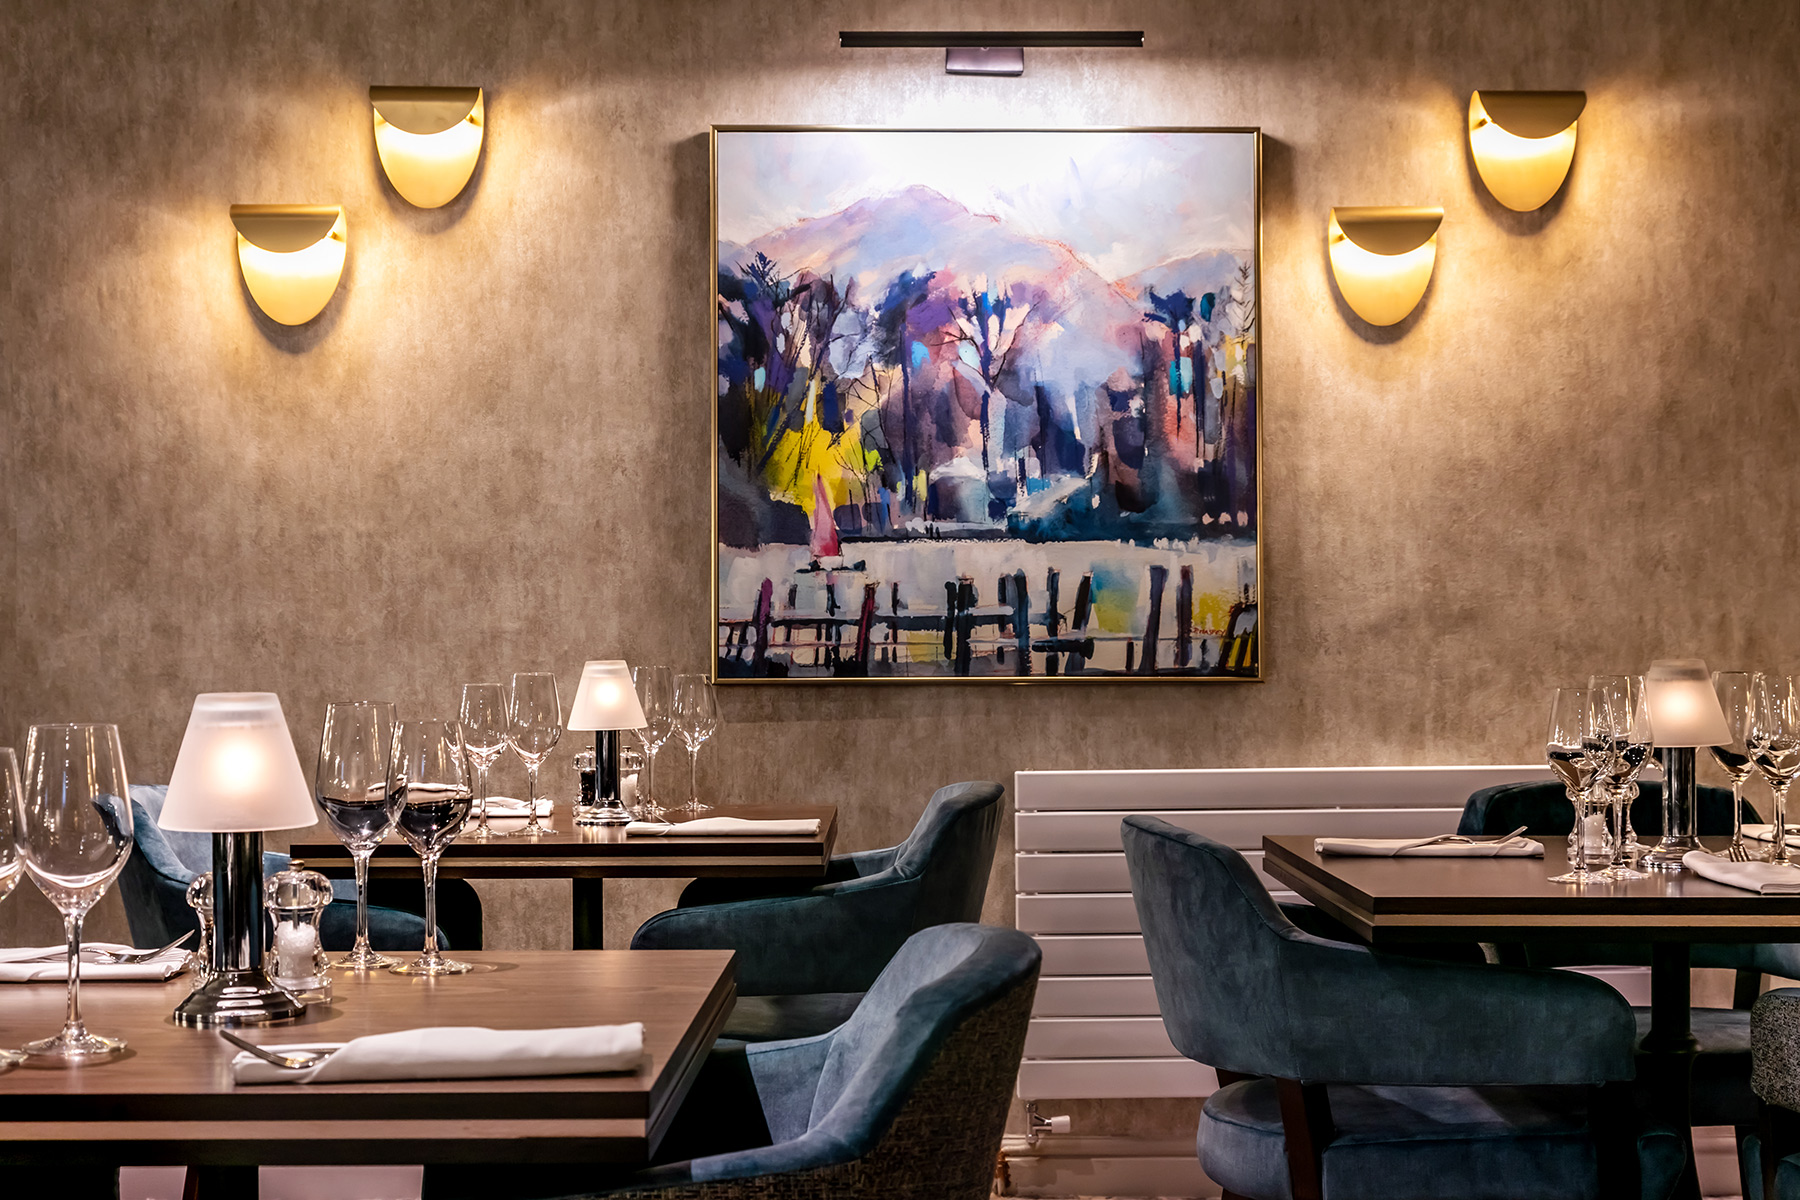 Brasserie 31 opens and is awarded its first AA Rosette